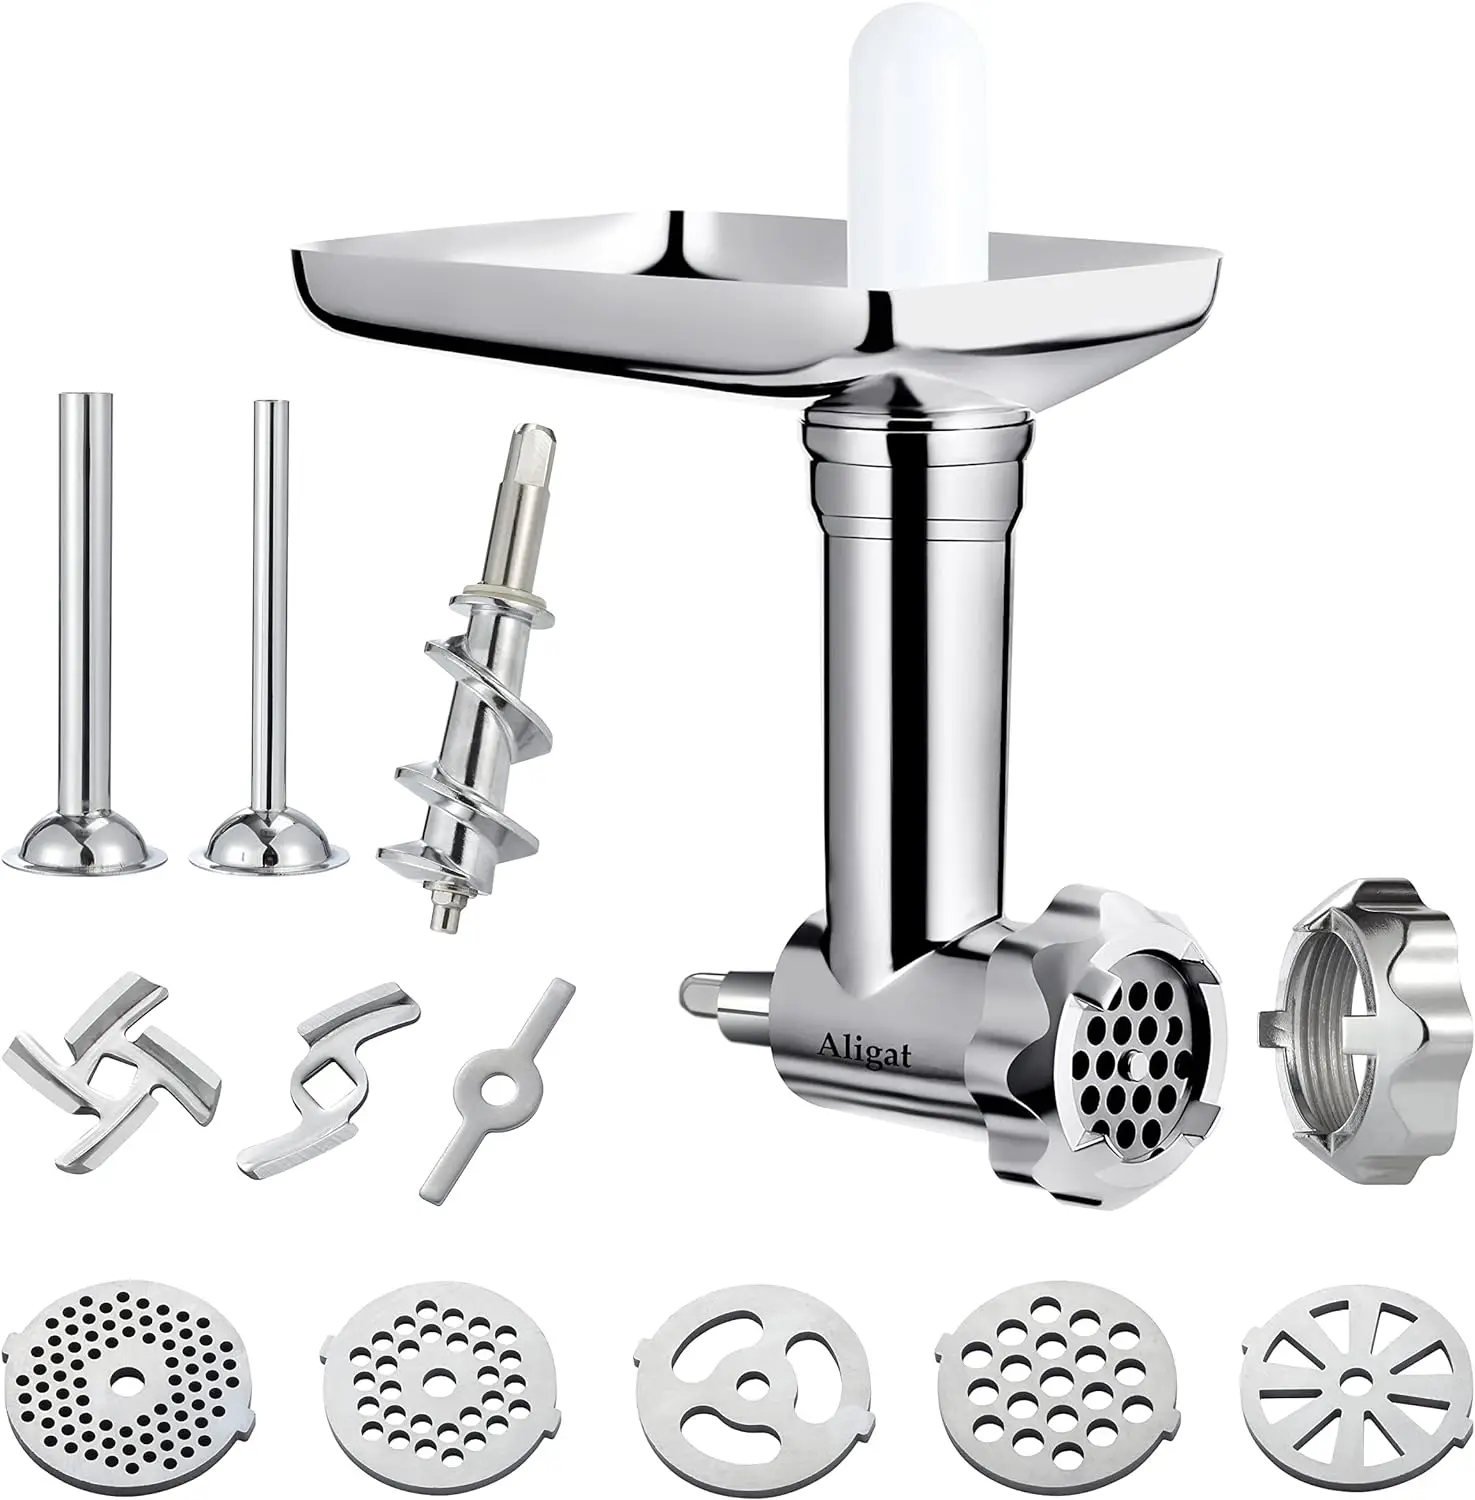 

Food Grinder Attachment for KitchenAid Stand Mixers Includes Sausage Stuffer Tubes,Durable Meat Grinder Food Processor Attachmen